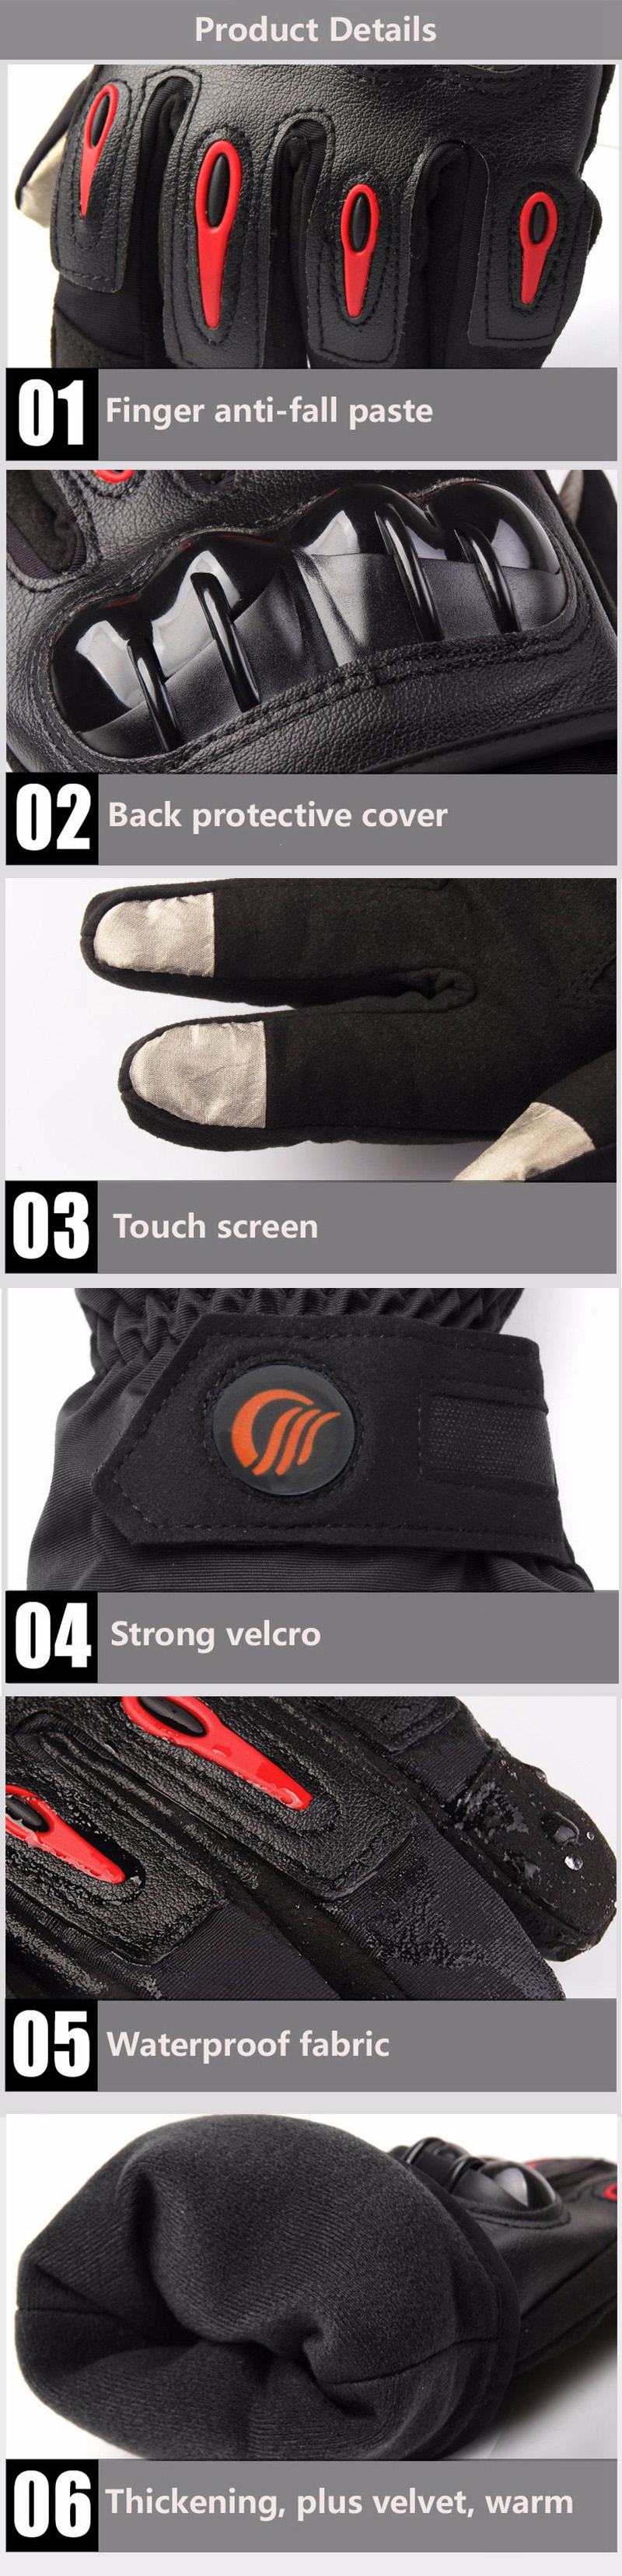 Riding Tribe Motocross Touch Screen Waterproof Warm Gloves MTV - 08